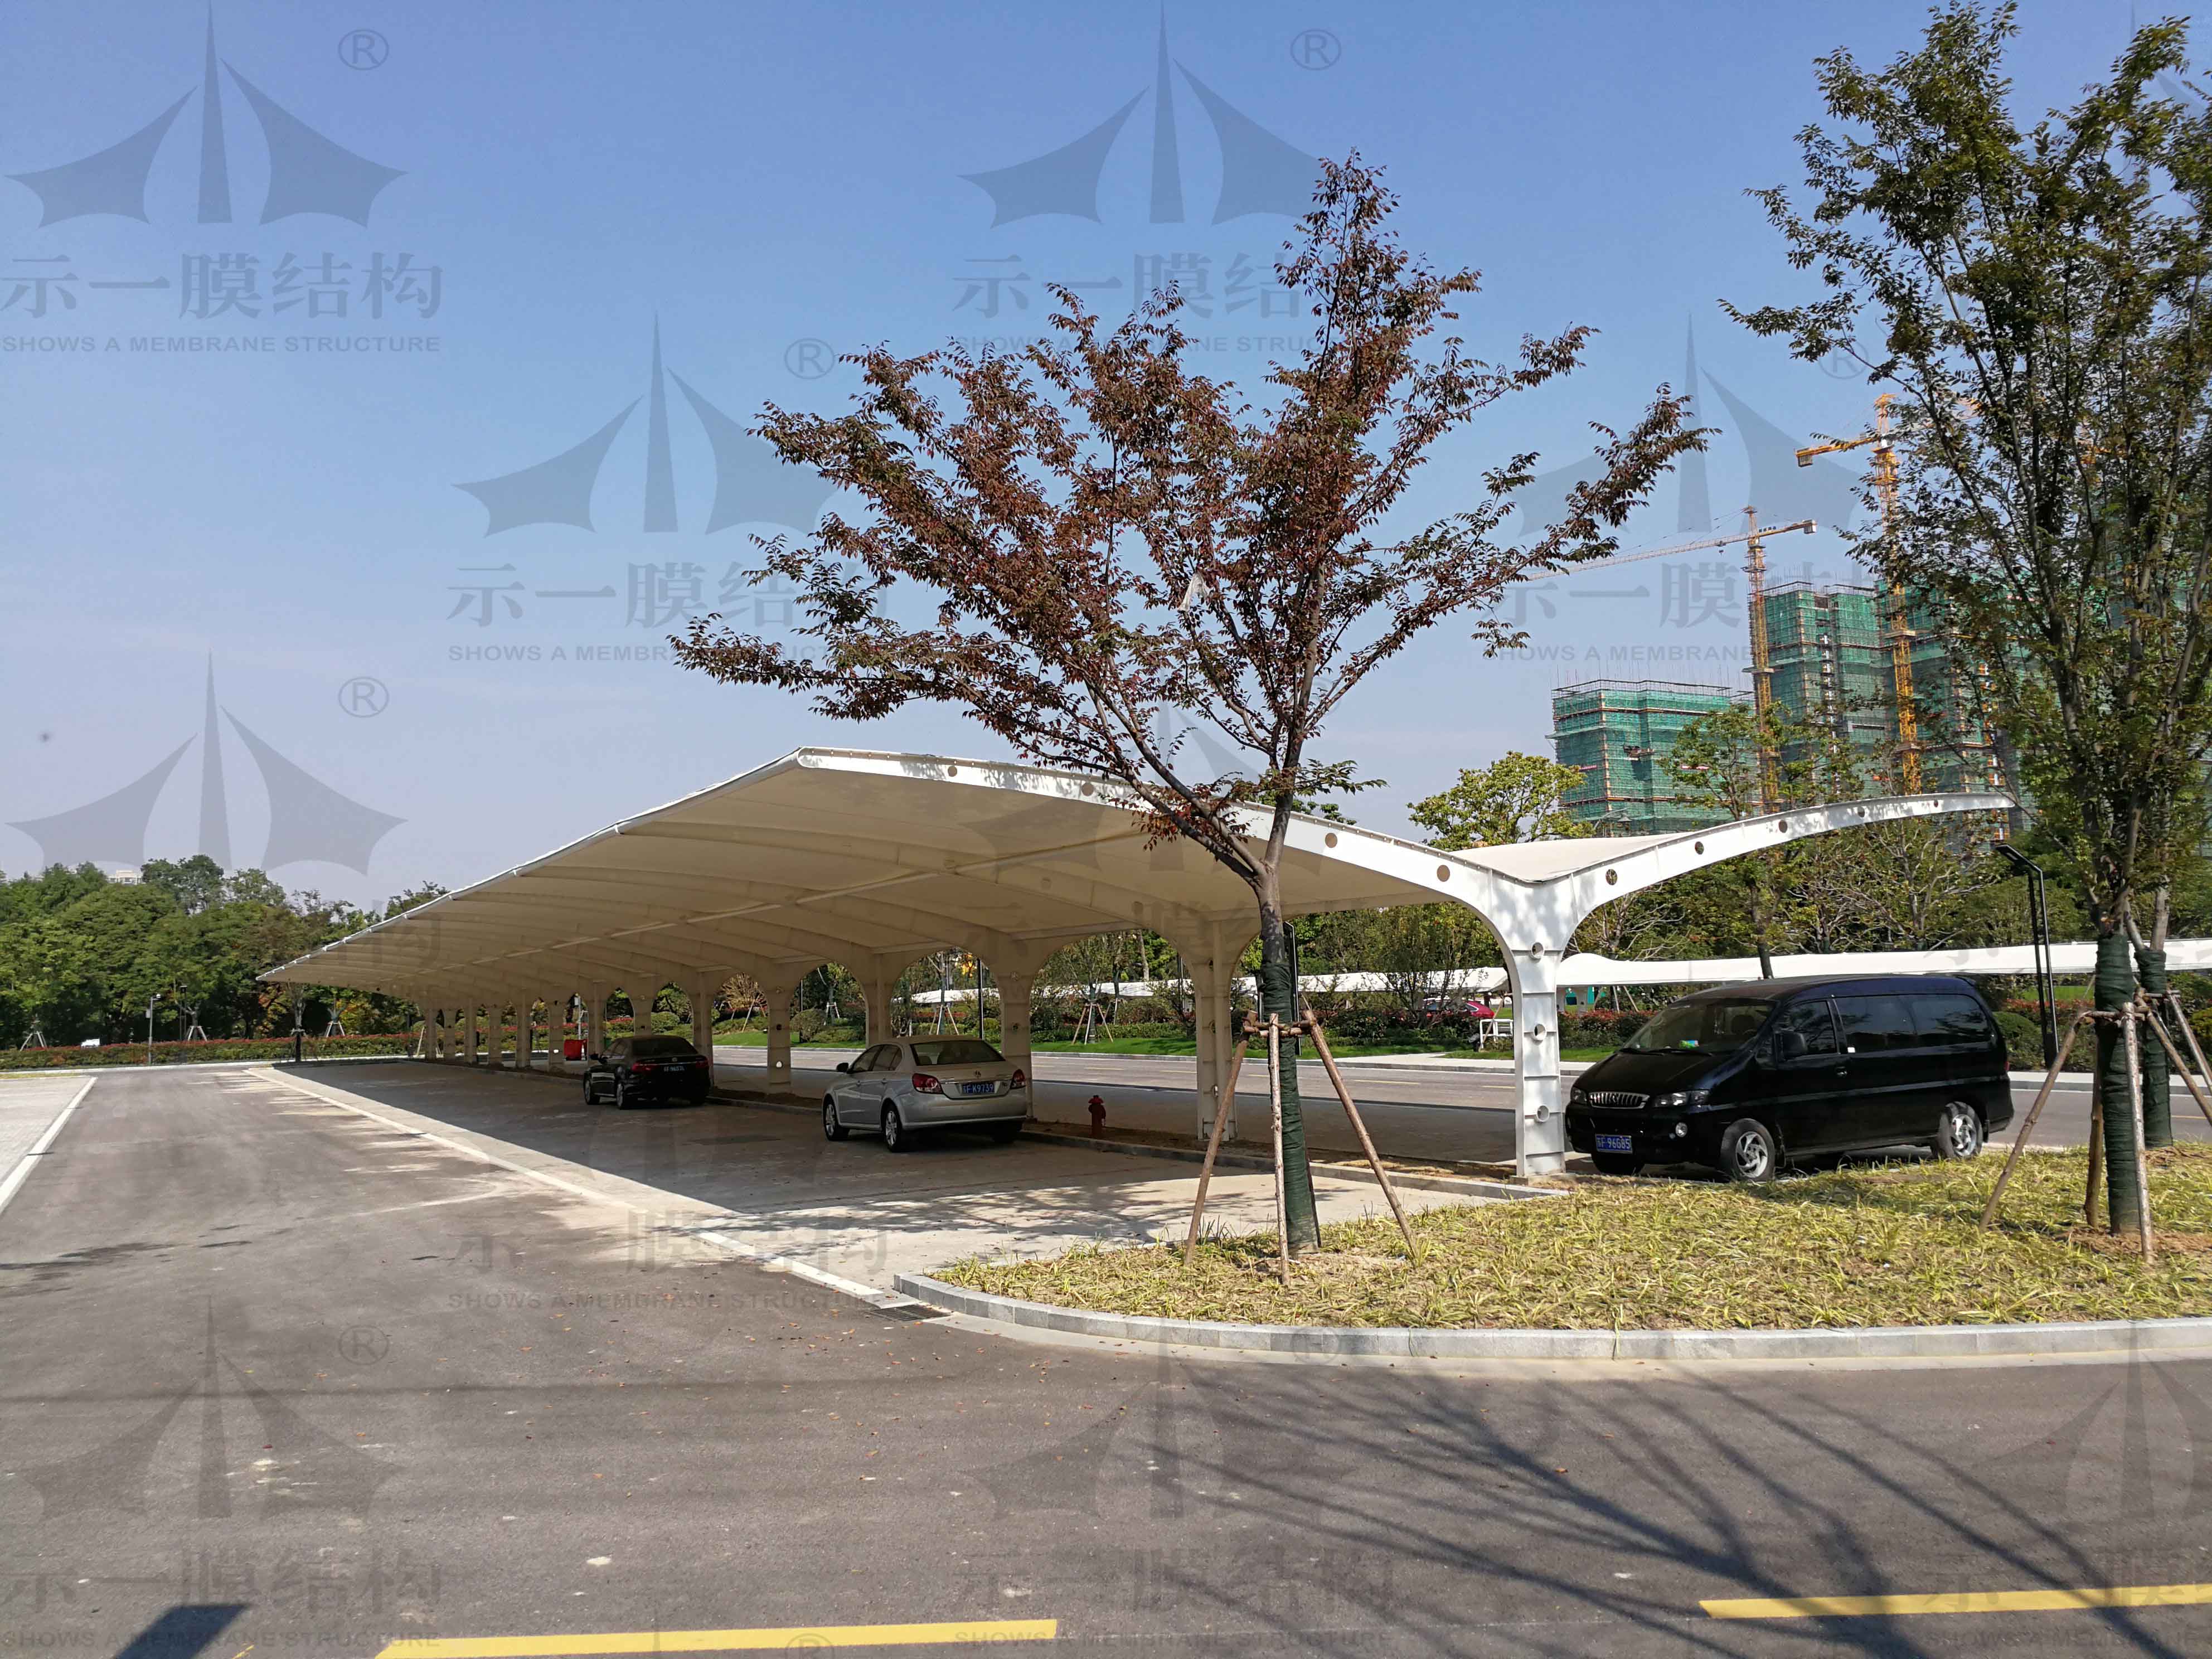 Frequently Asked Questions Q&A of Membrane Structure Carport